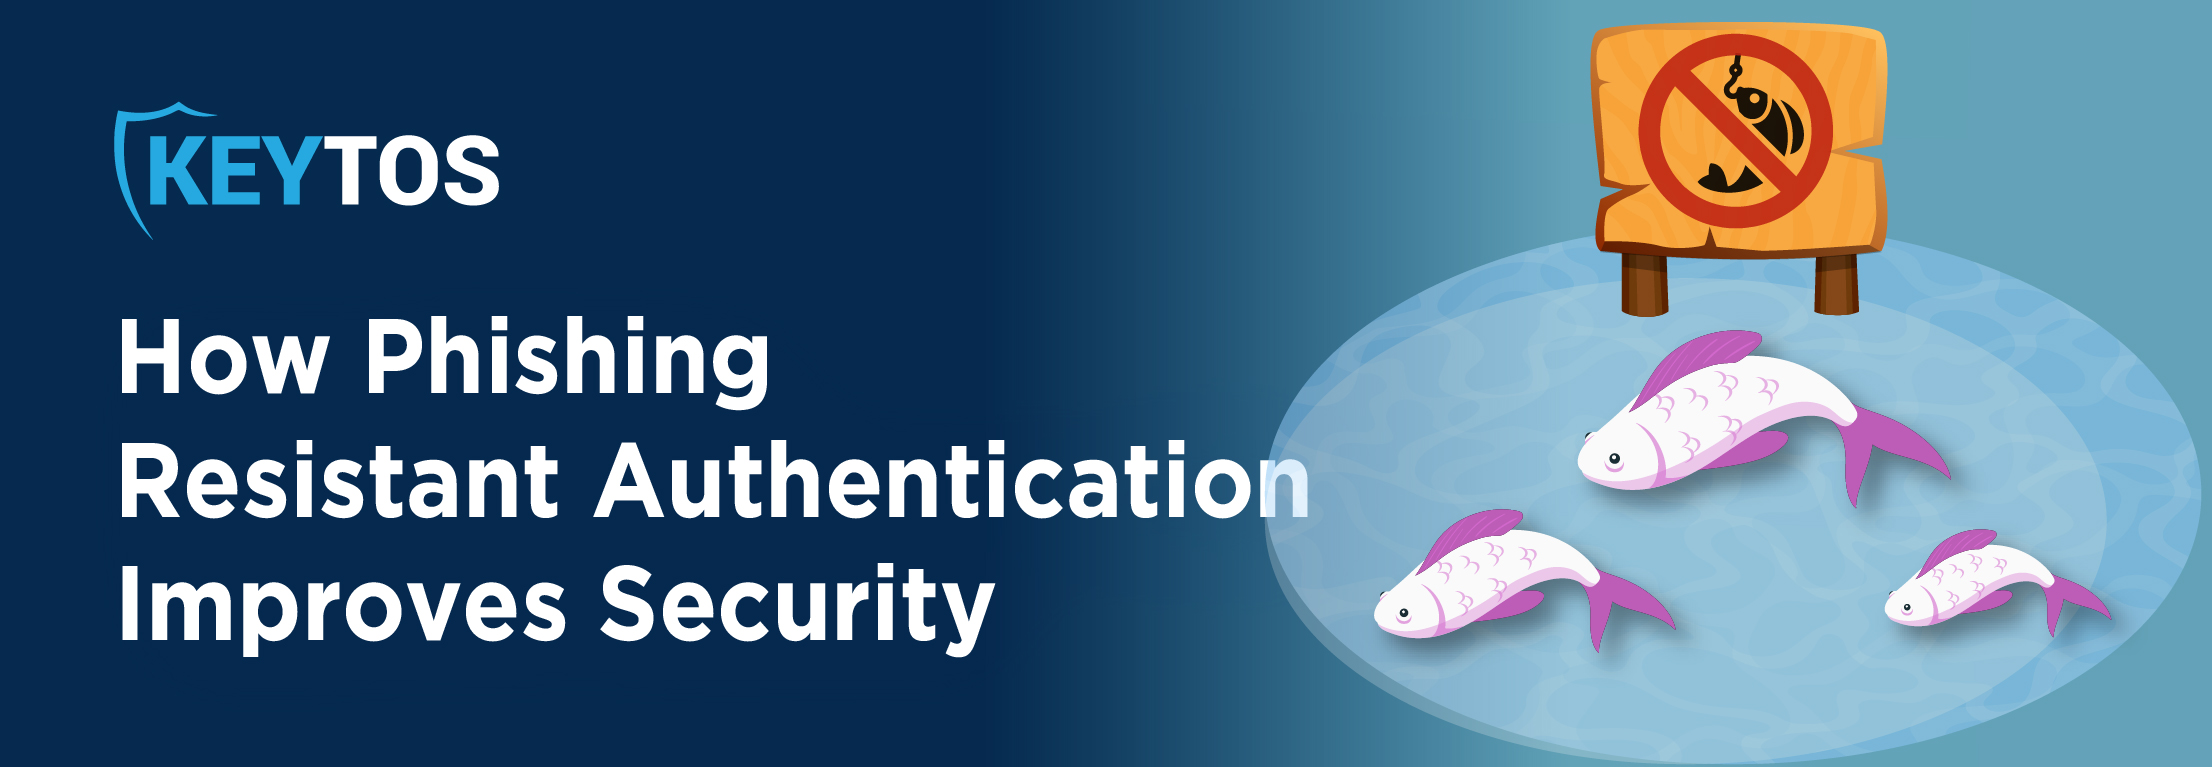 How phishing resistant authentication improves your security